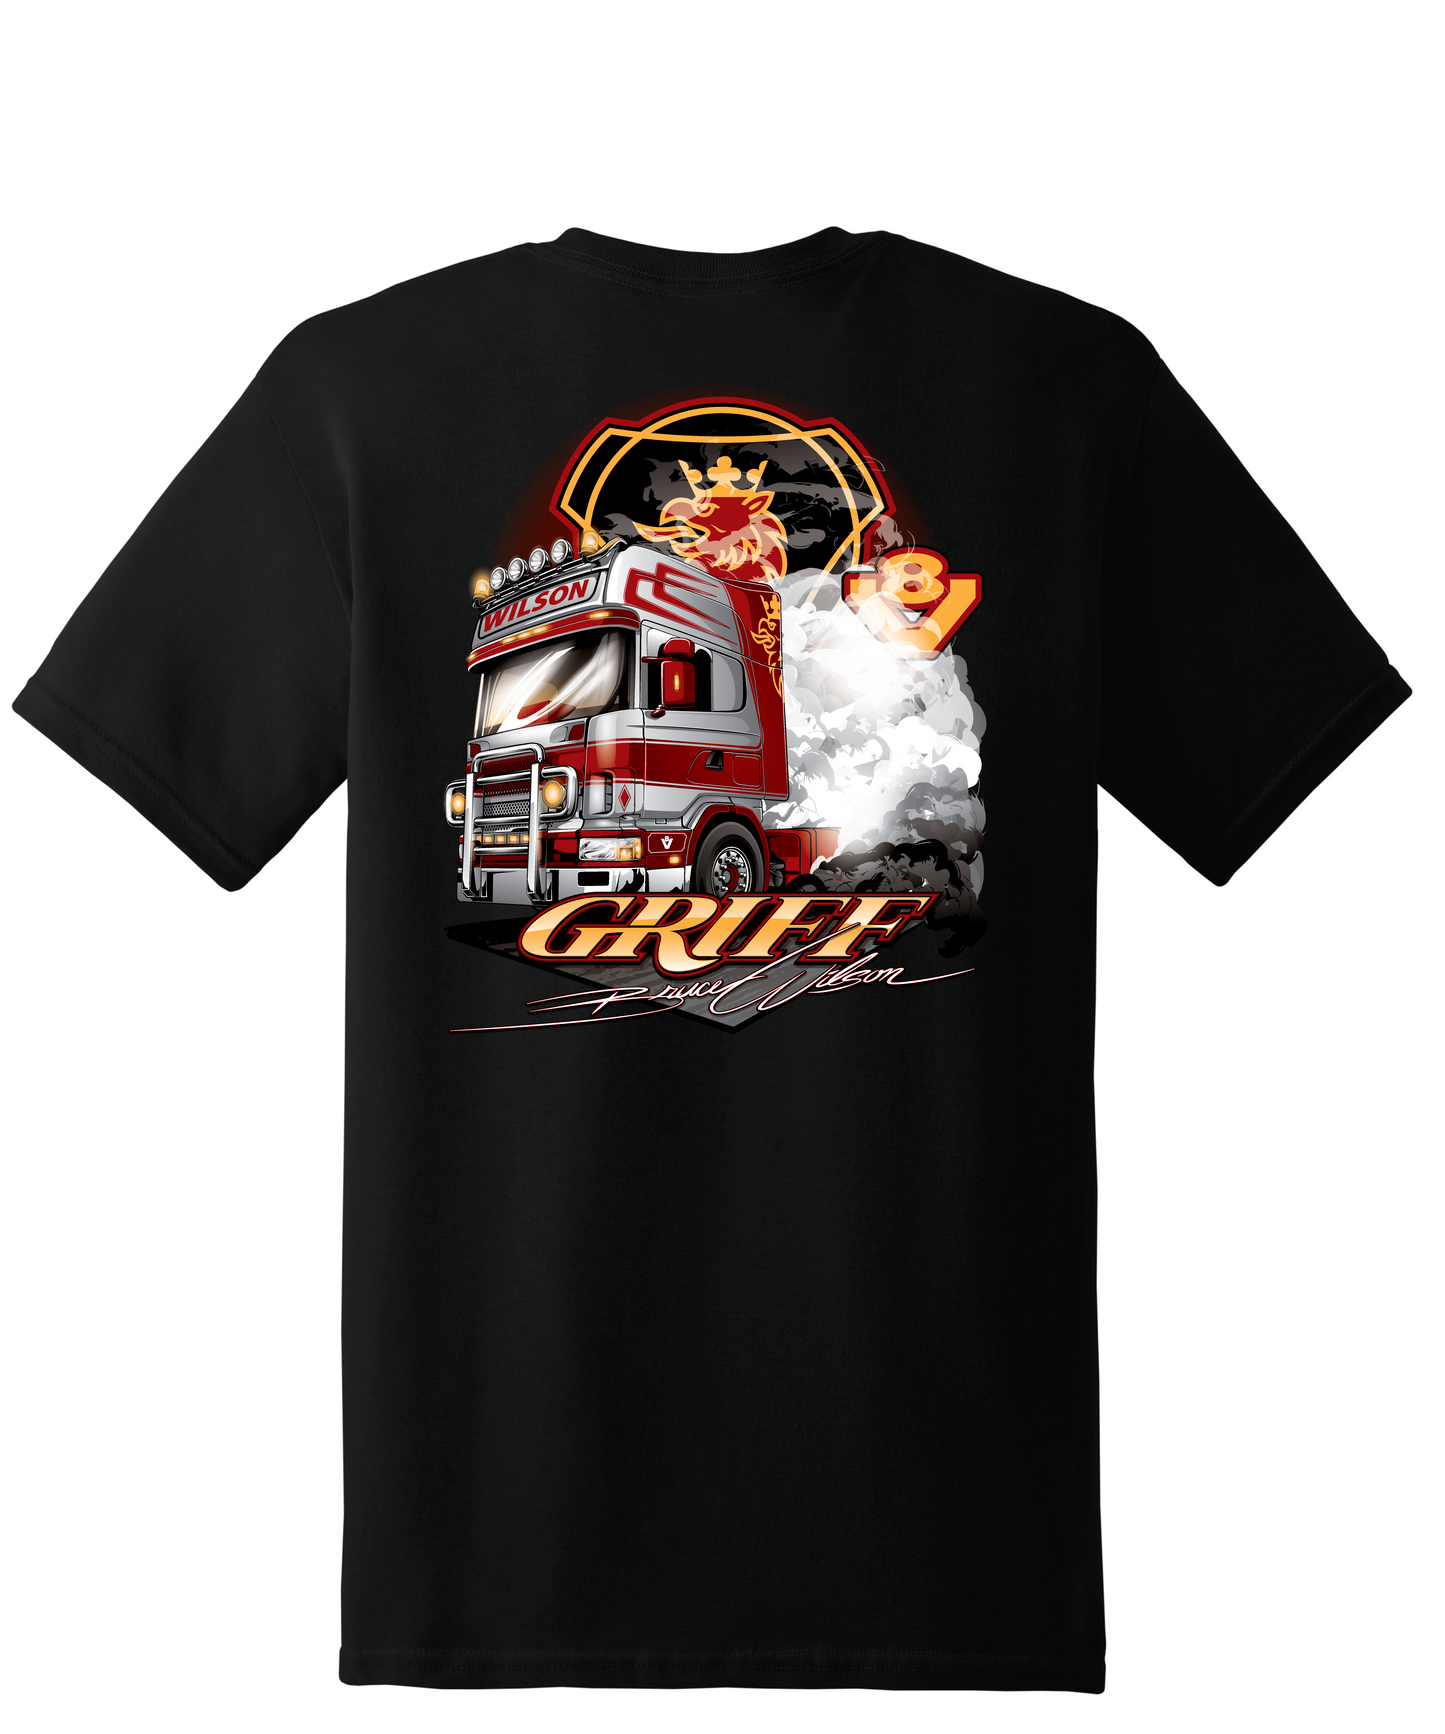 Griff Scania Truck Tee